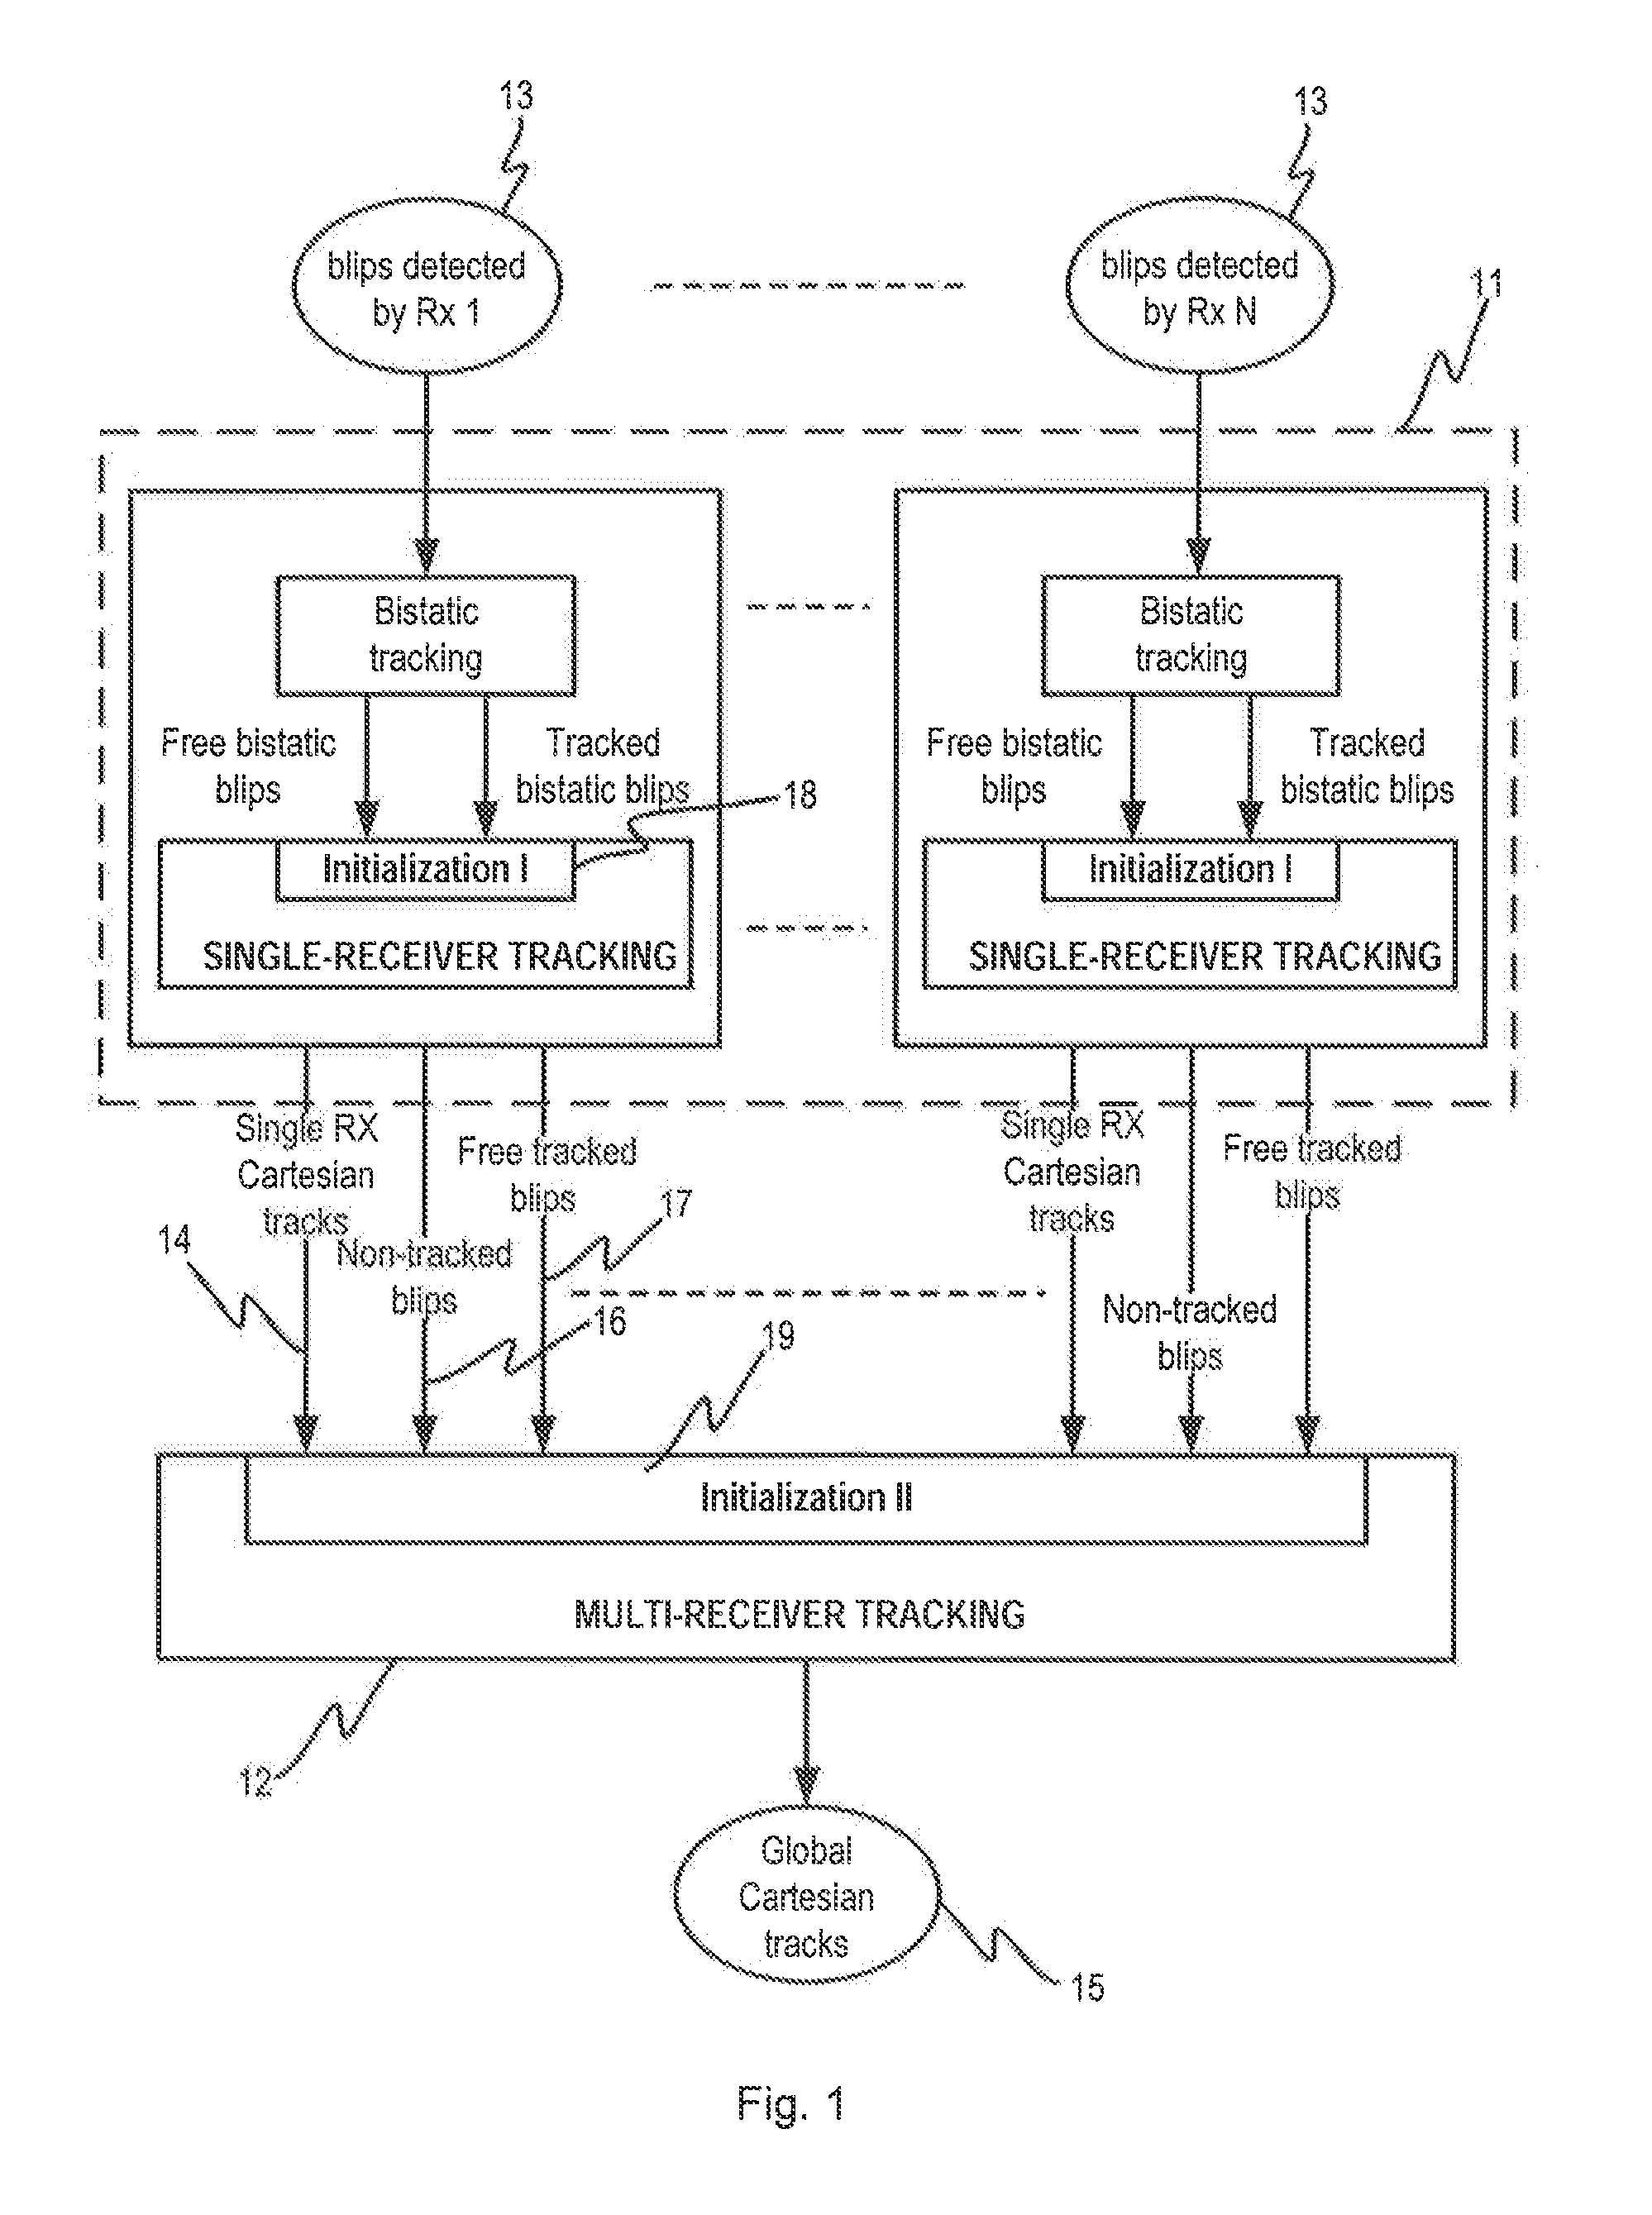 Method for initializing cartesian tracks based on bistatic measurements performed by one or more receivers of a multistatic radar system